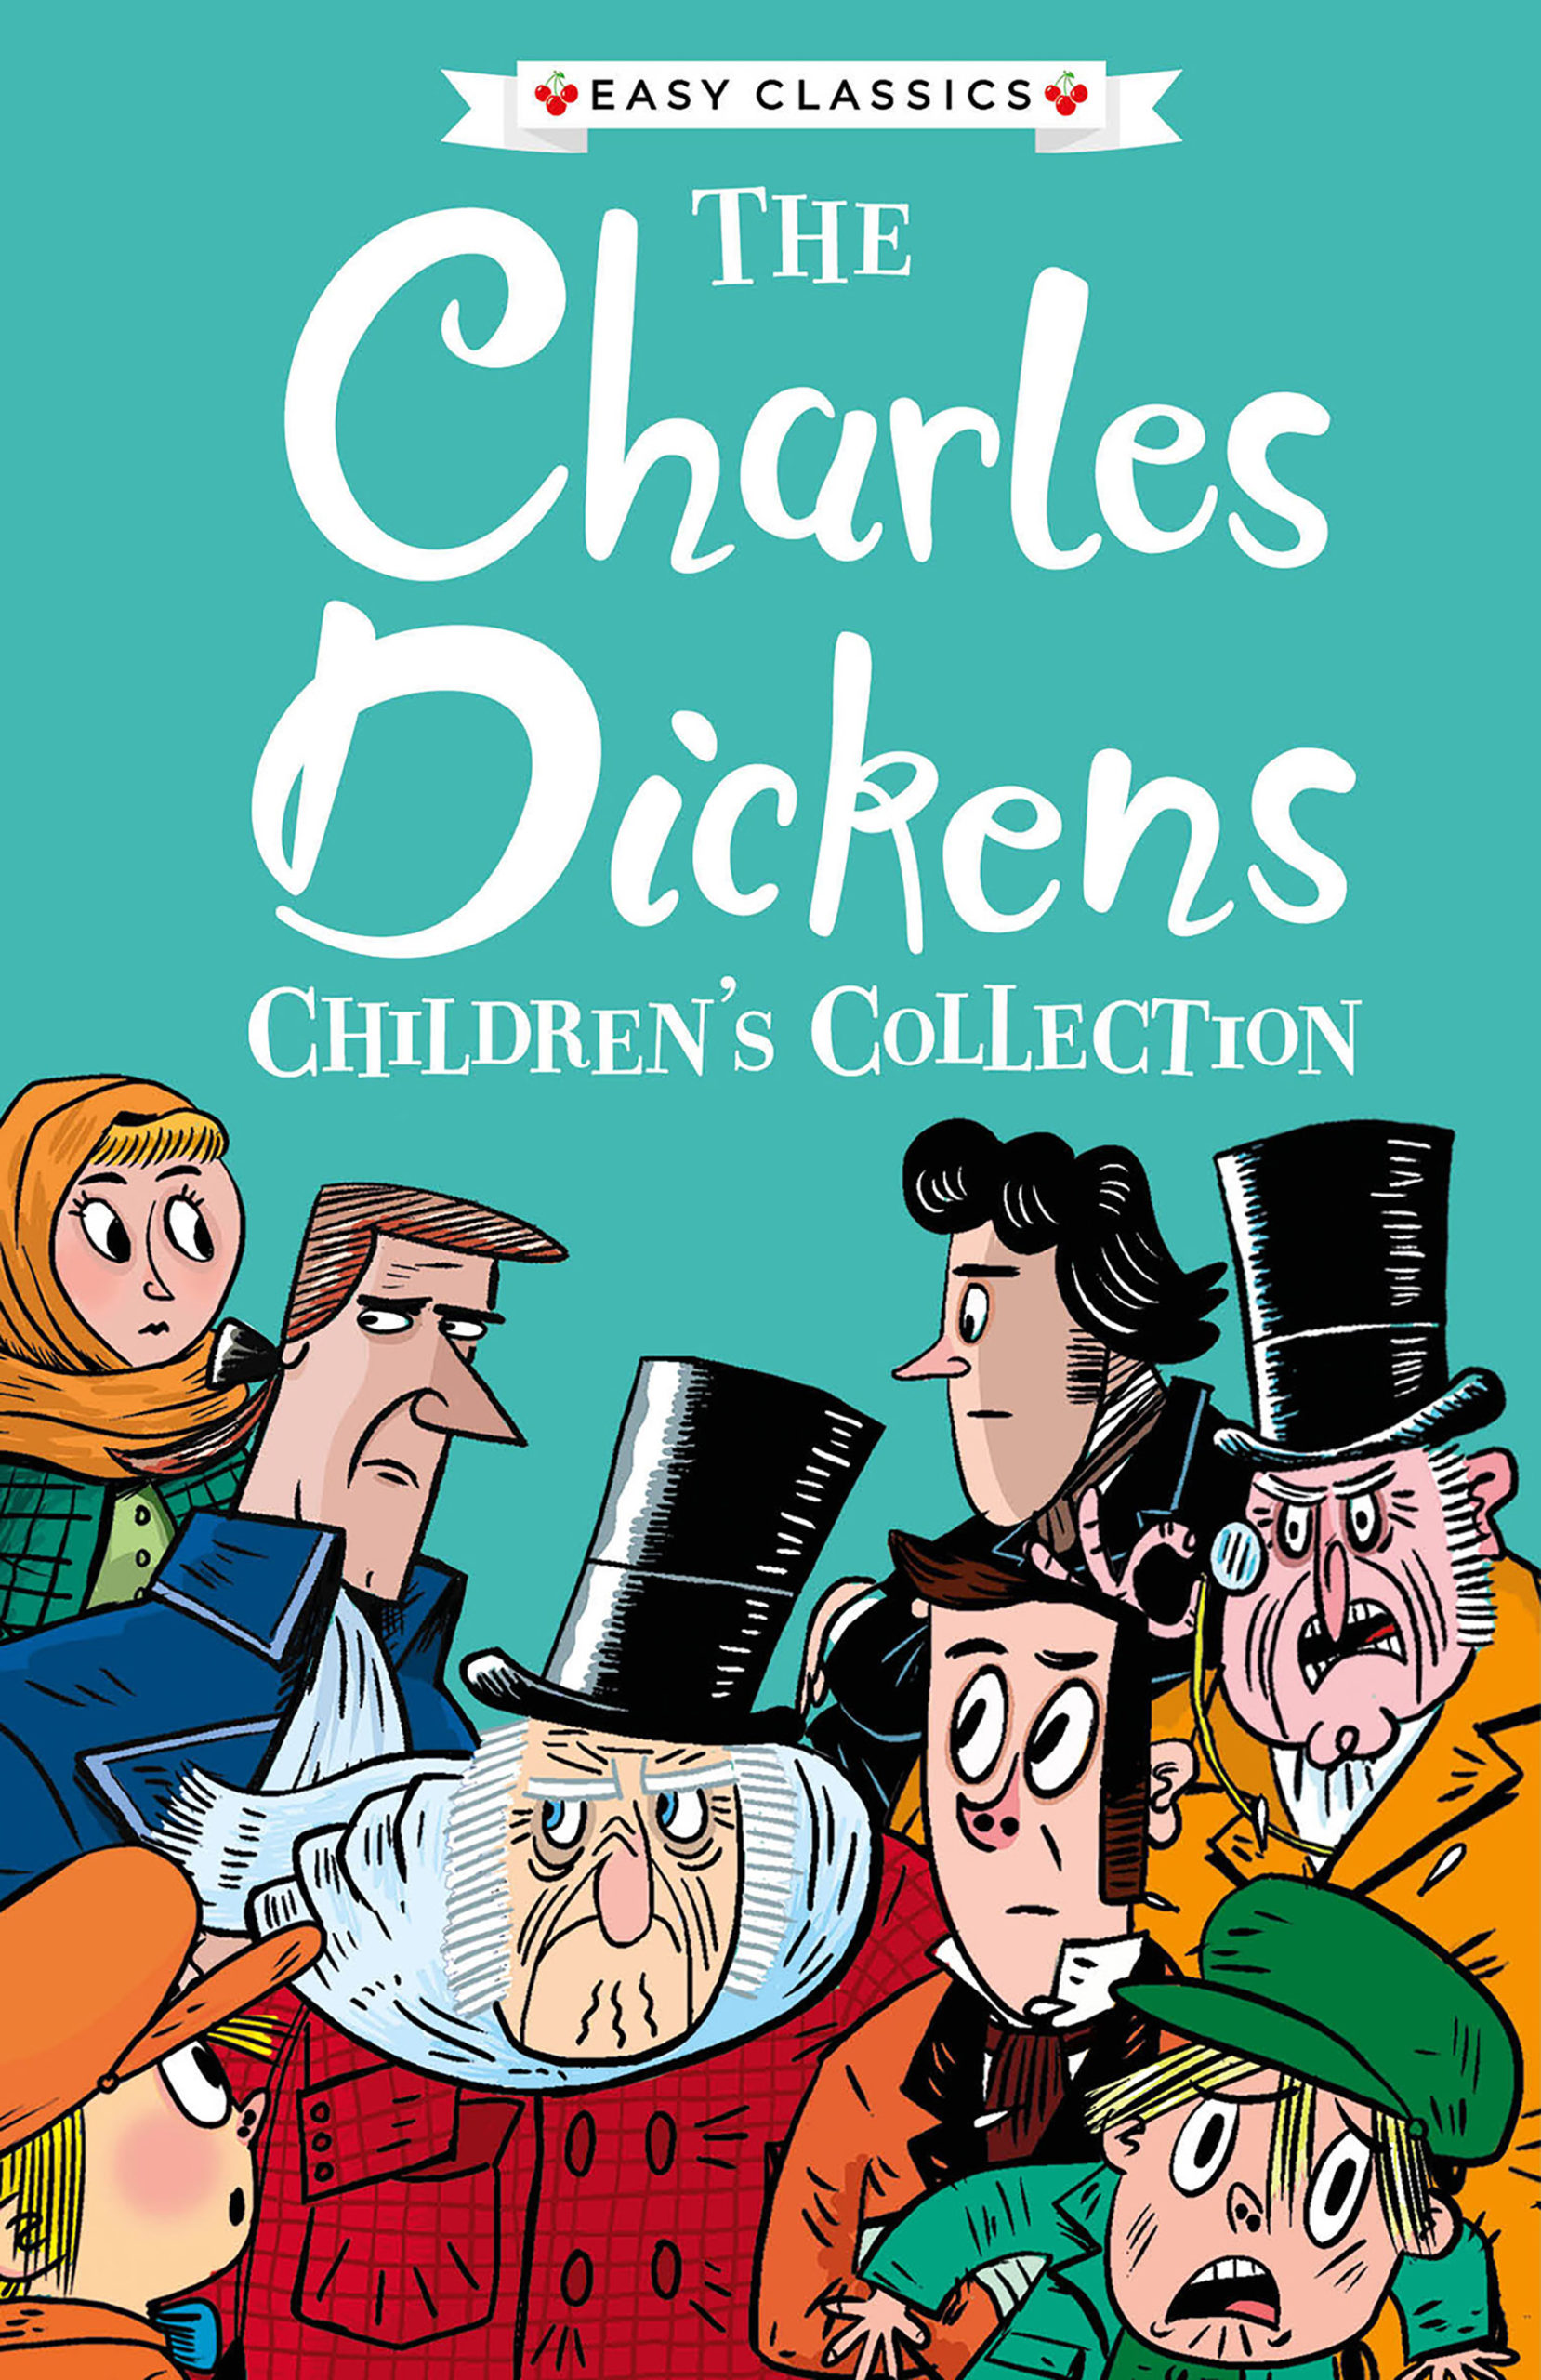 10 Books The Charles Dickens Children's Collection Book Sets In